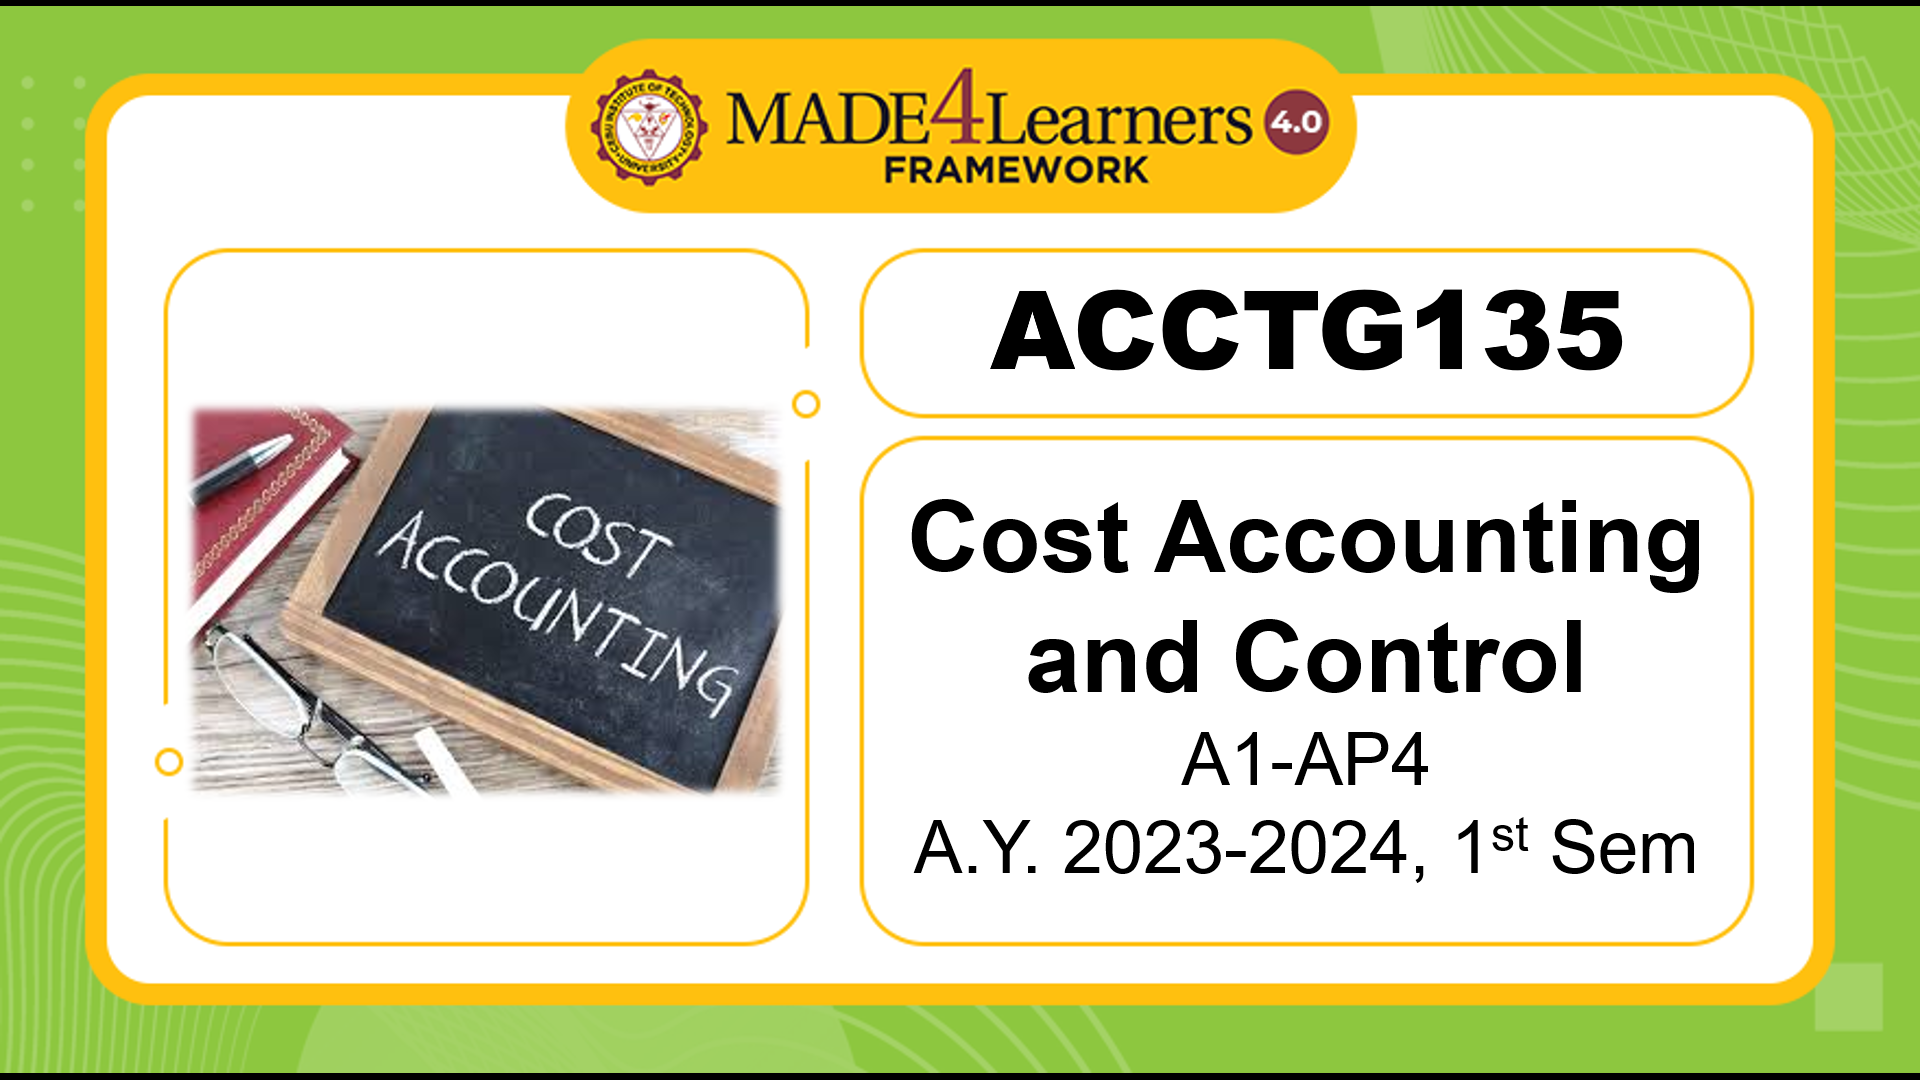 AY23-24 1stSem ACCTG135 A1-AP4 Cost Accounting and Control